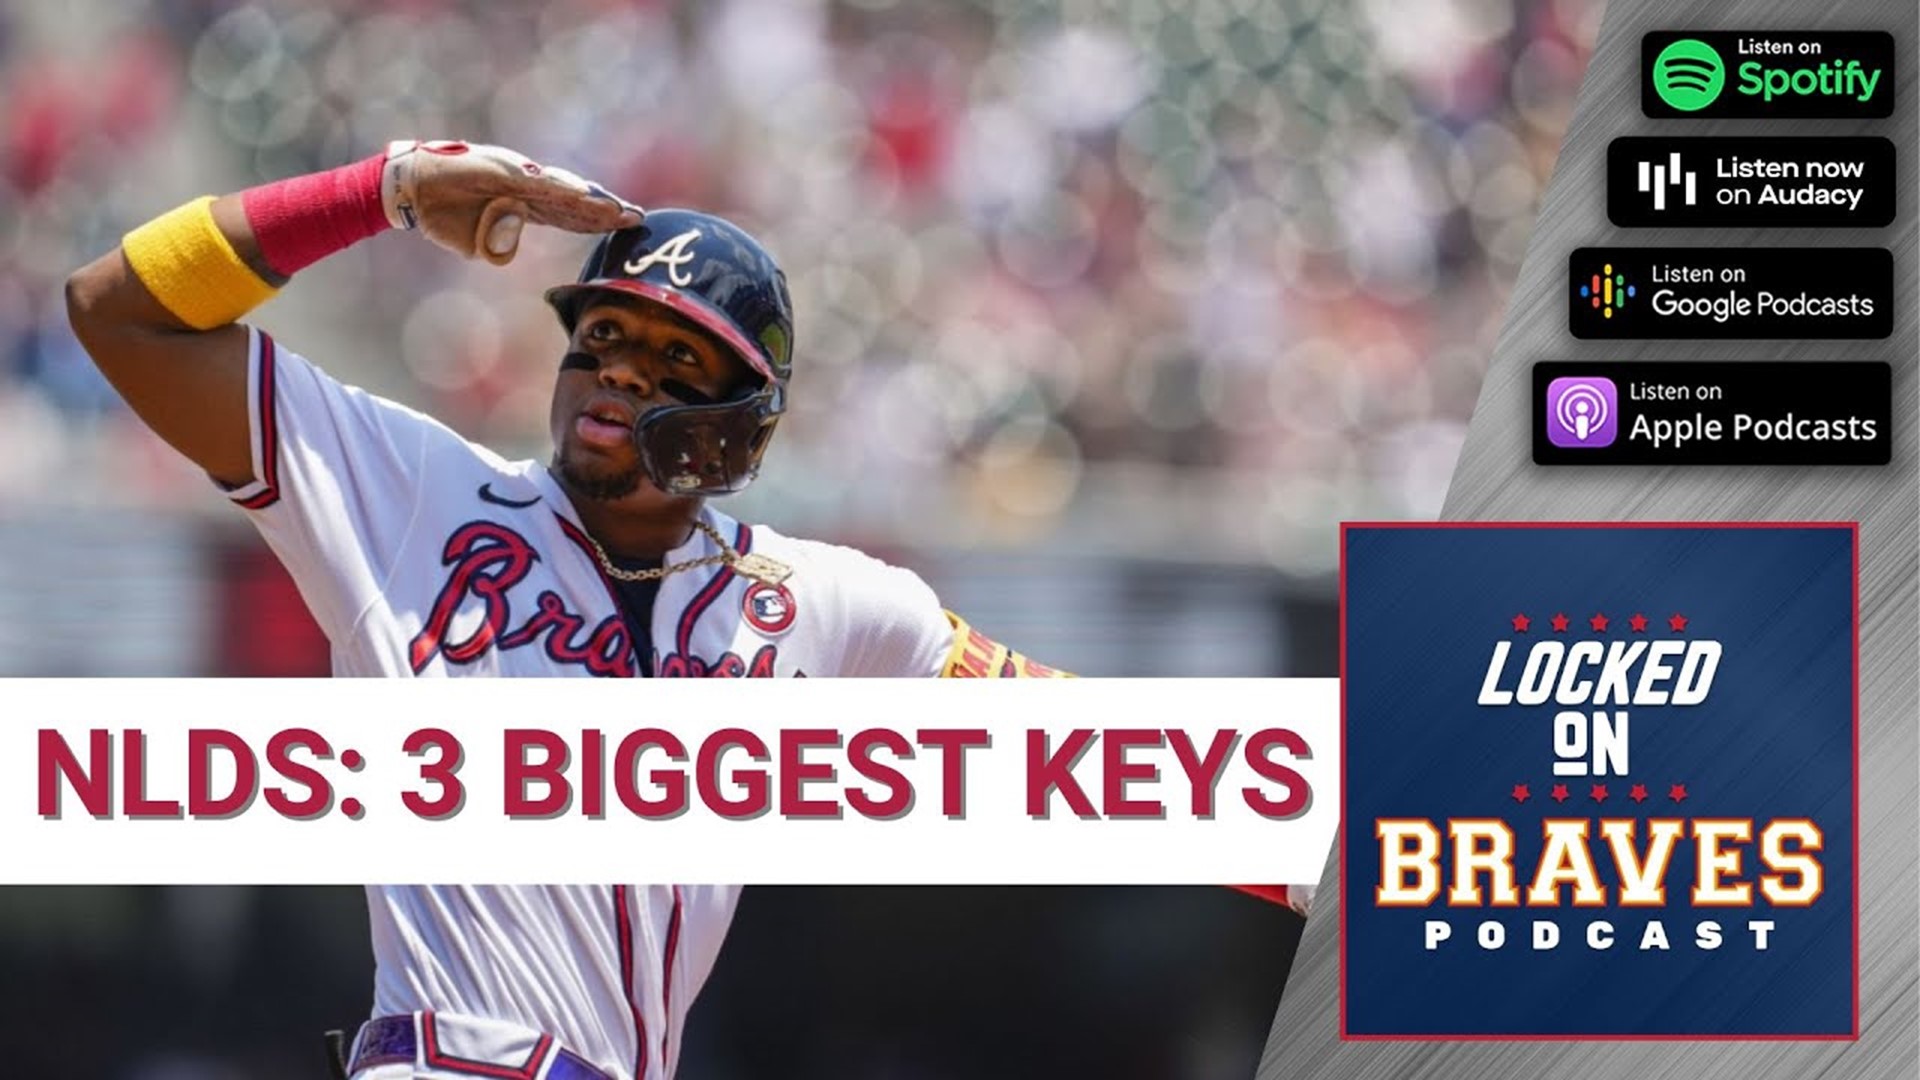 Atlanta Braves vs. Phillies NLDS: 3 Biggest Keys -- and Spencer Strider Contract Extension